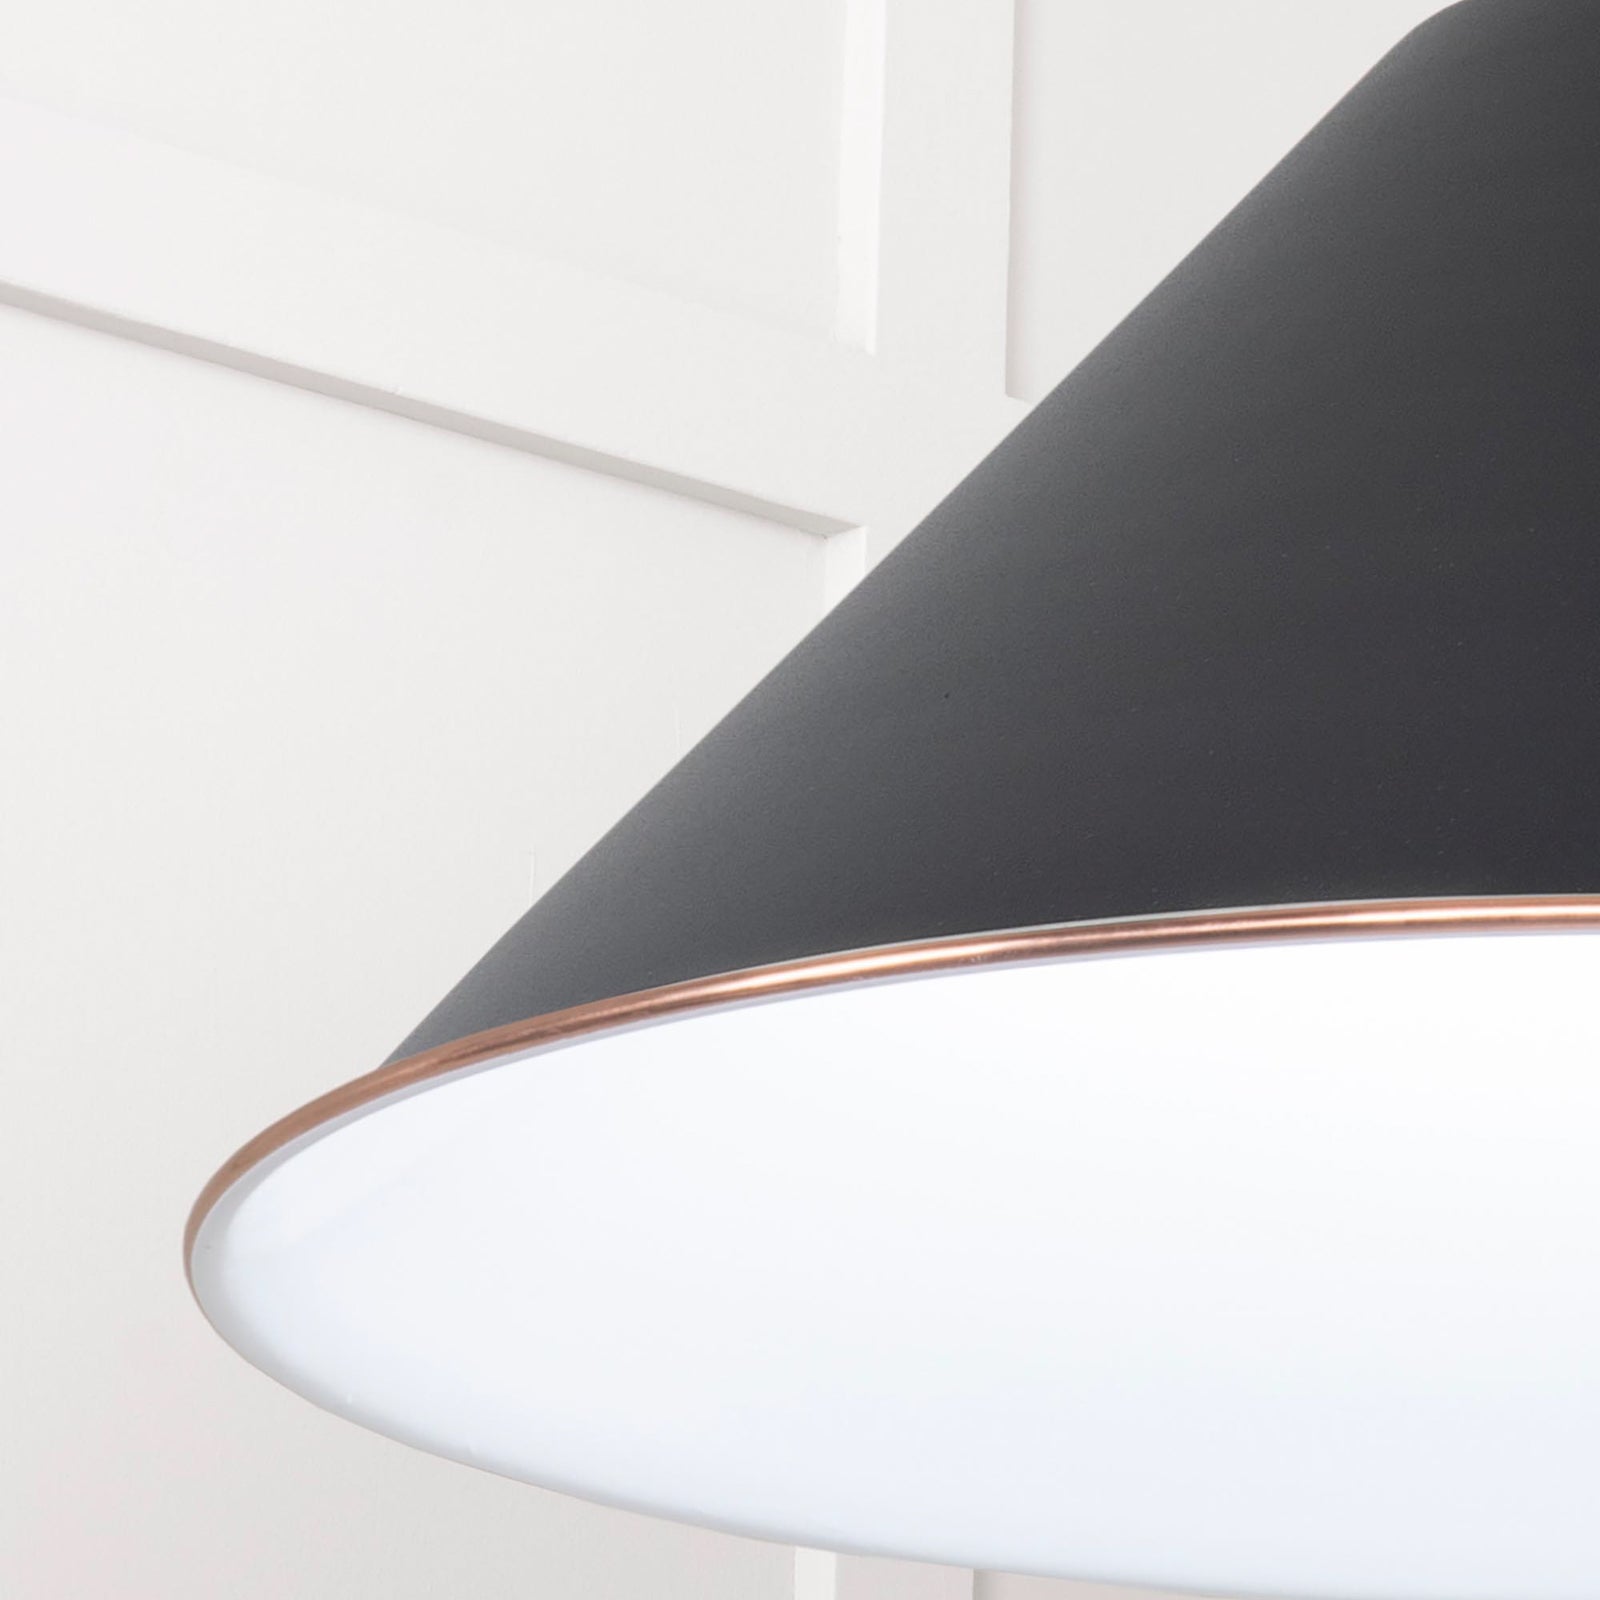 SHOW Close Up Image of Hockley Ceiling Light in Elan Black in Frost White